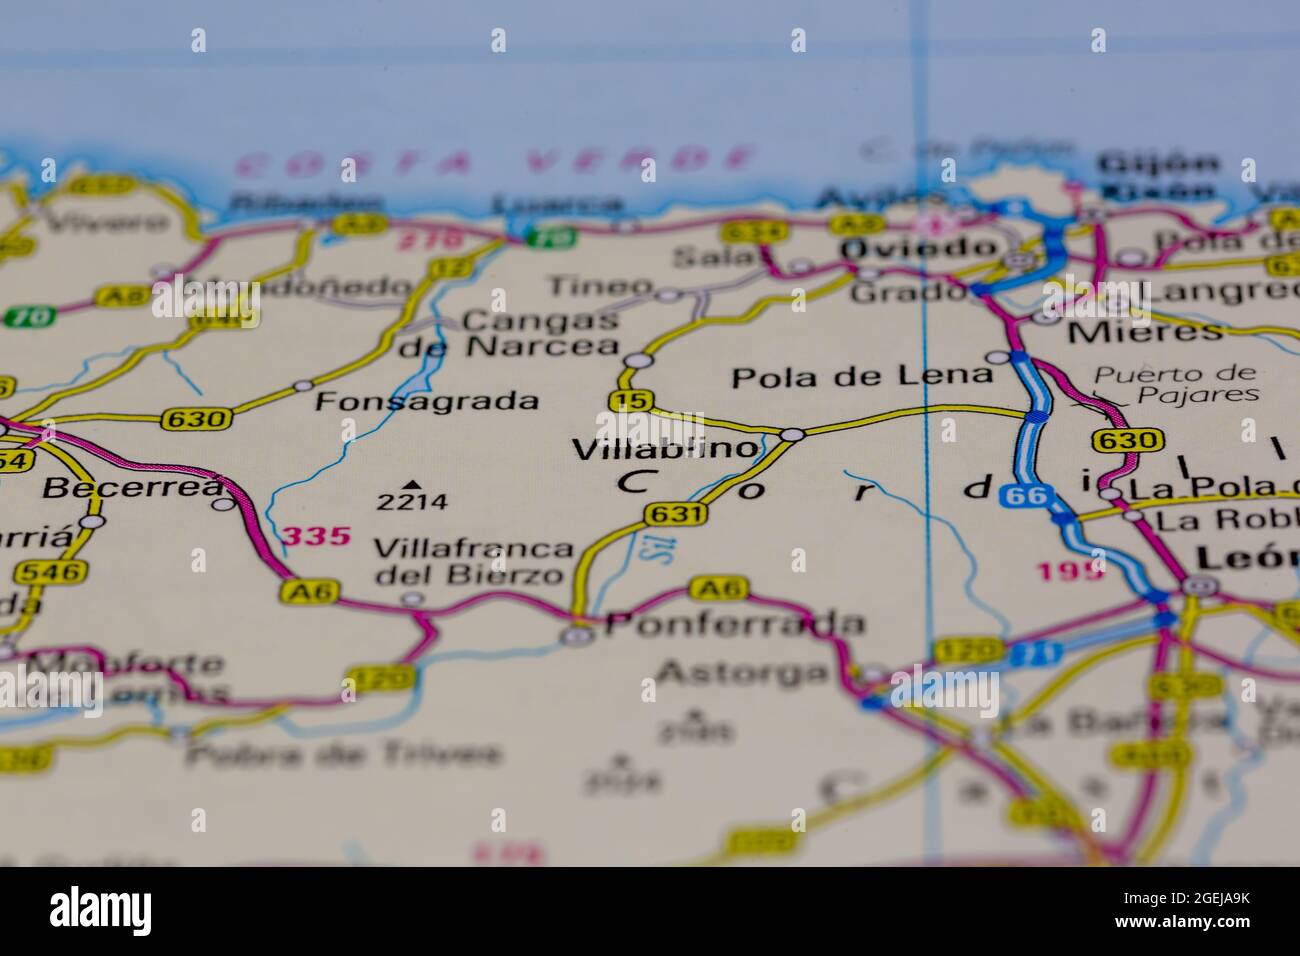 Villablino Spain shown on a road map or Geography map Stock Photo